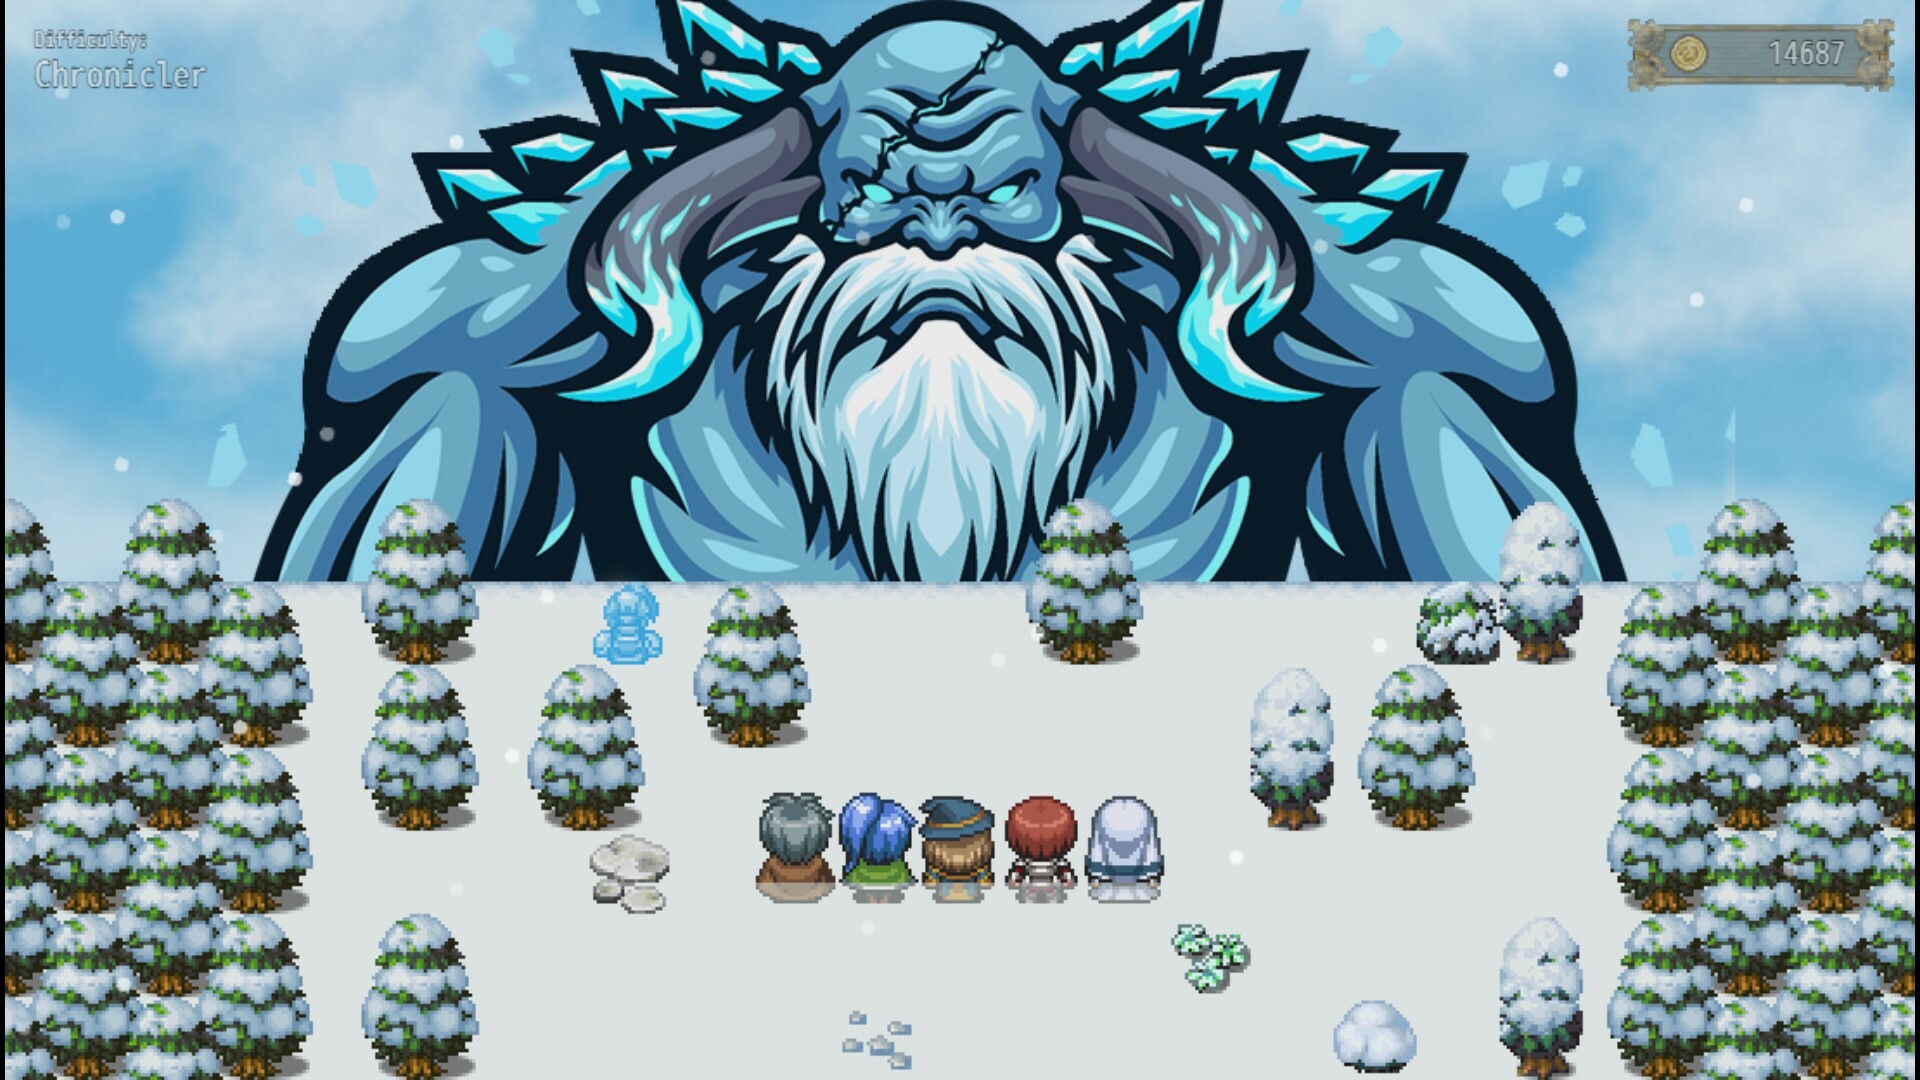 Monster Hunters: Frost Giant Free Download